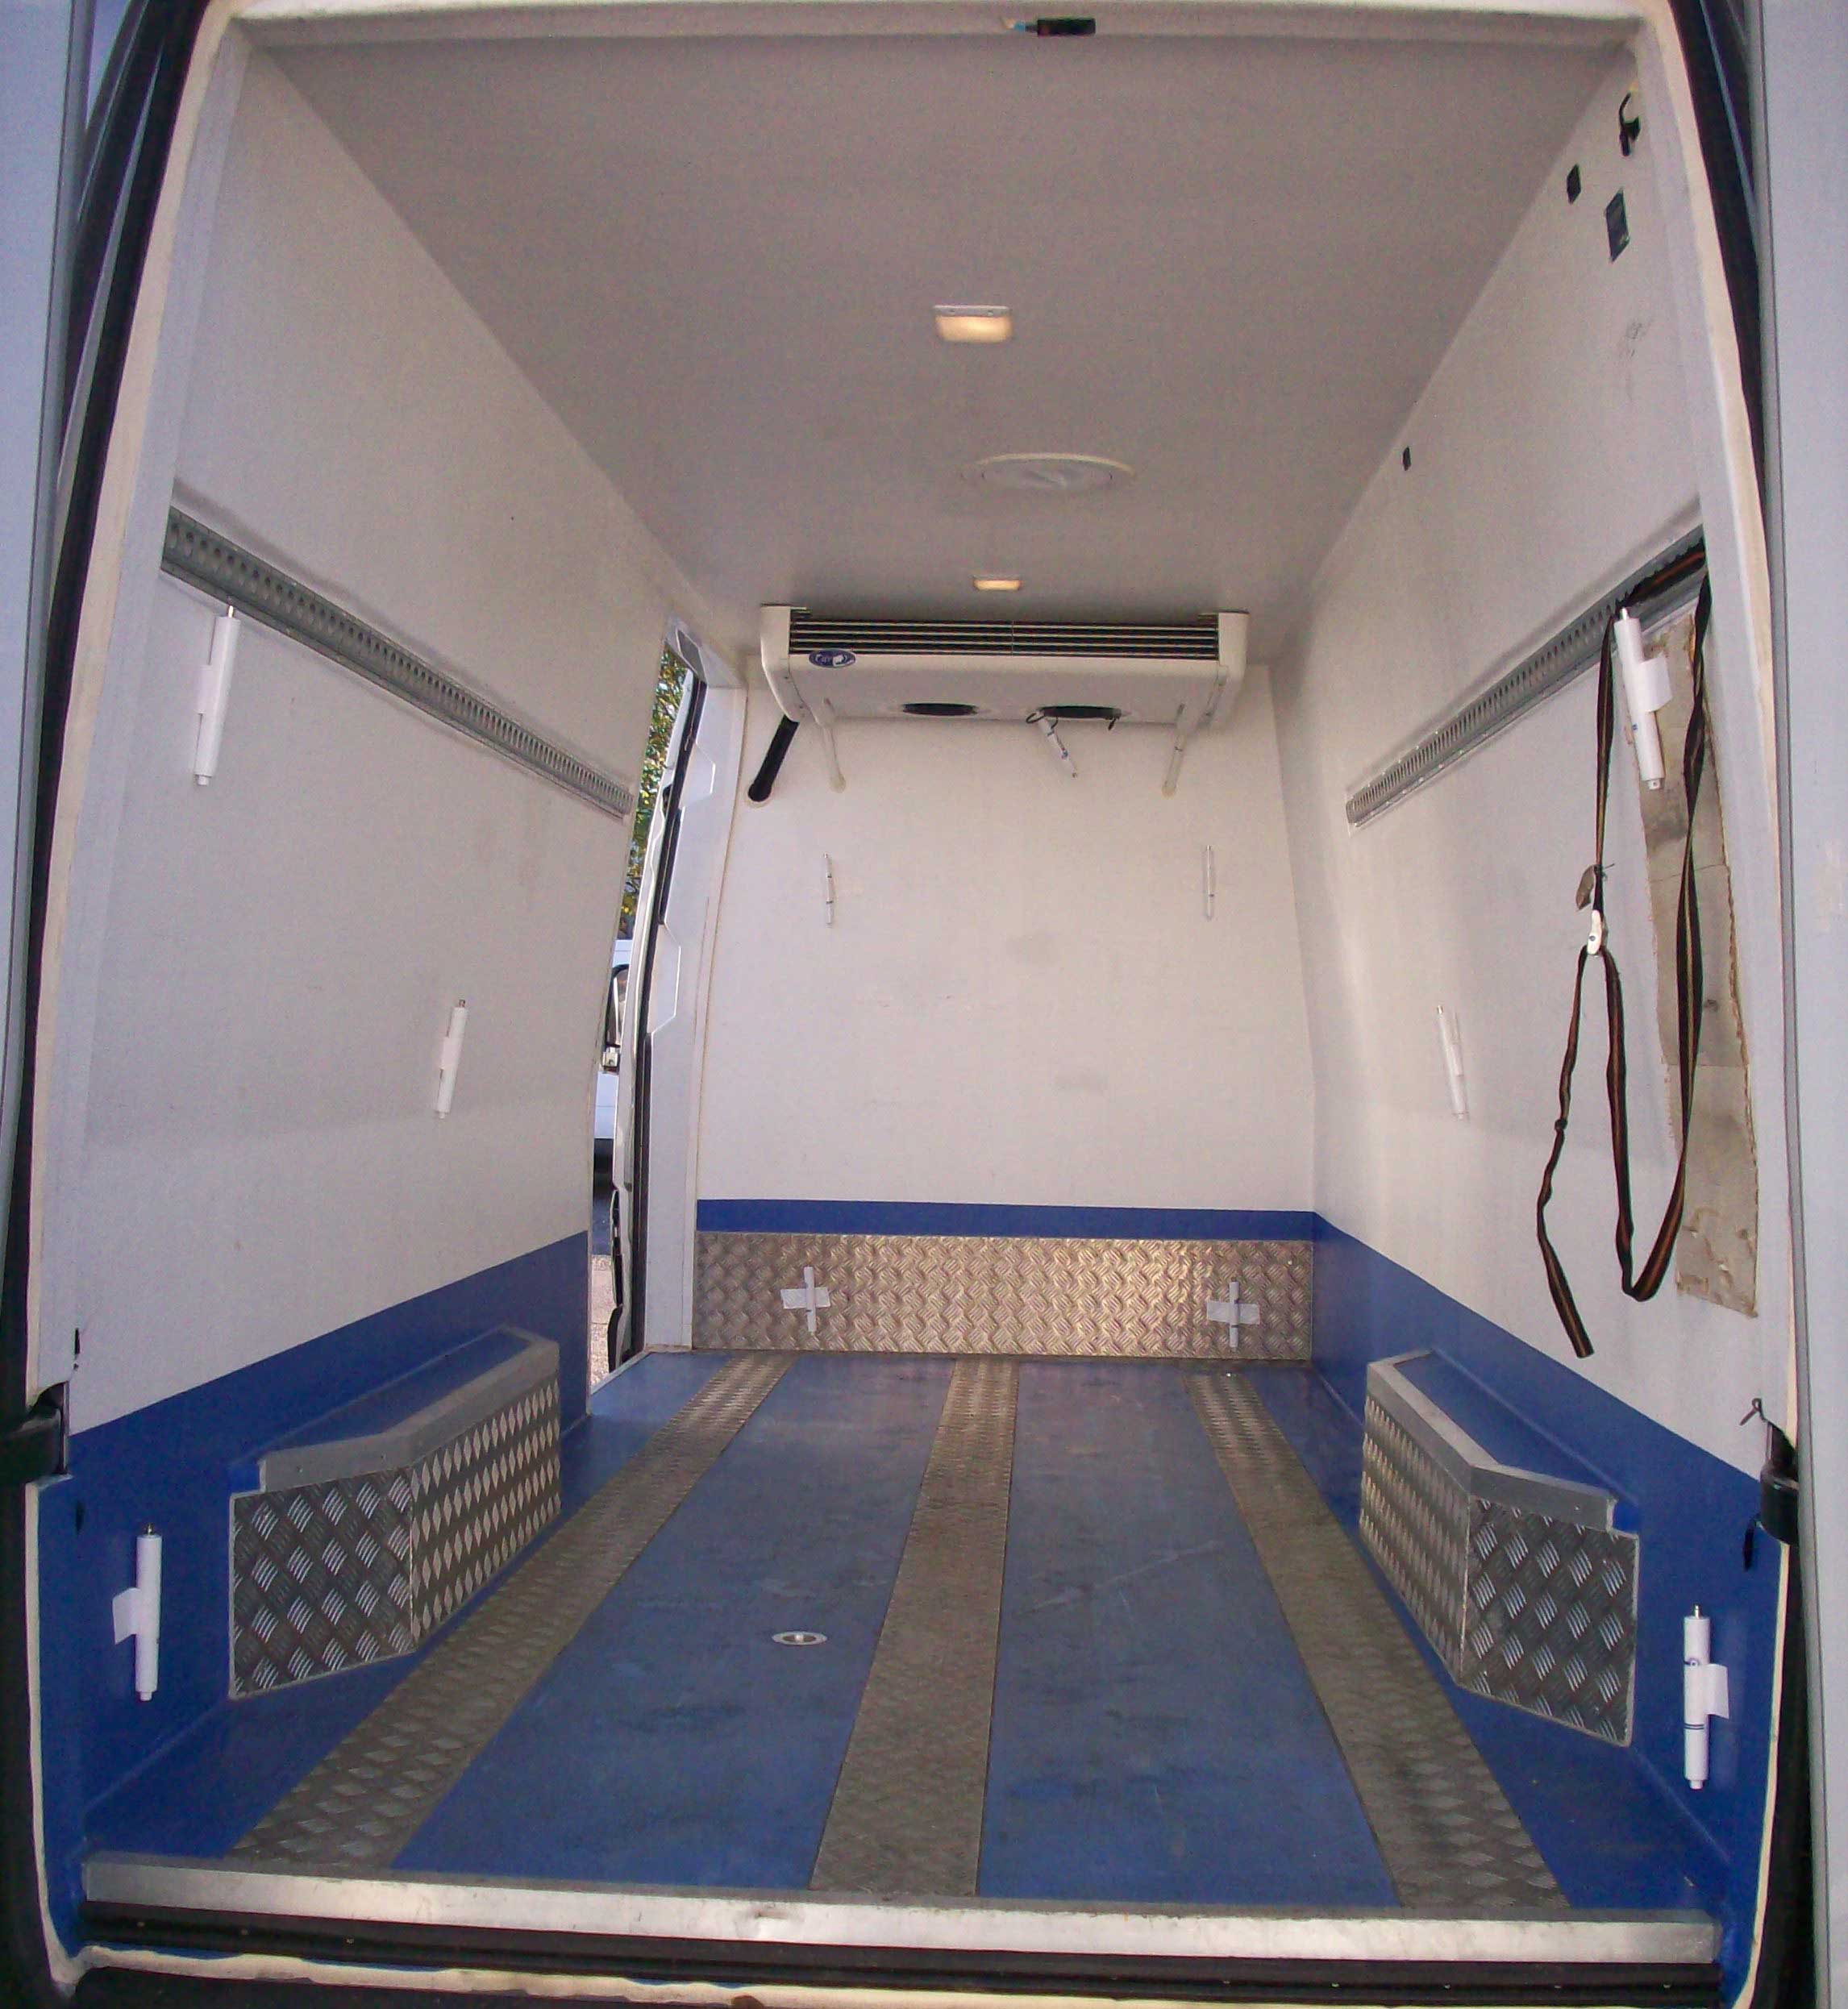 empty storage compartment of a large van